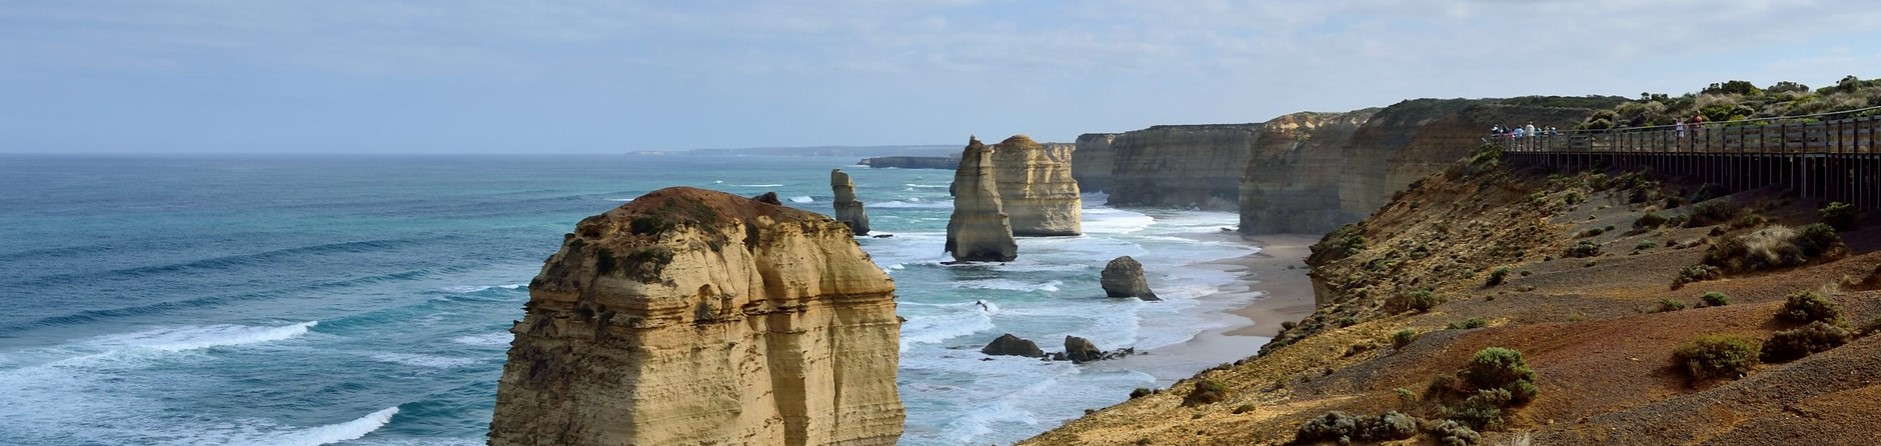 When is the best time to visit the Great Ocean Road?